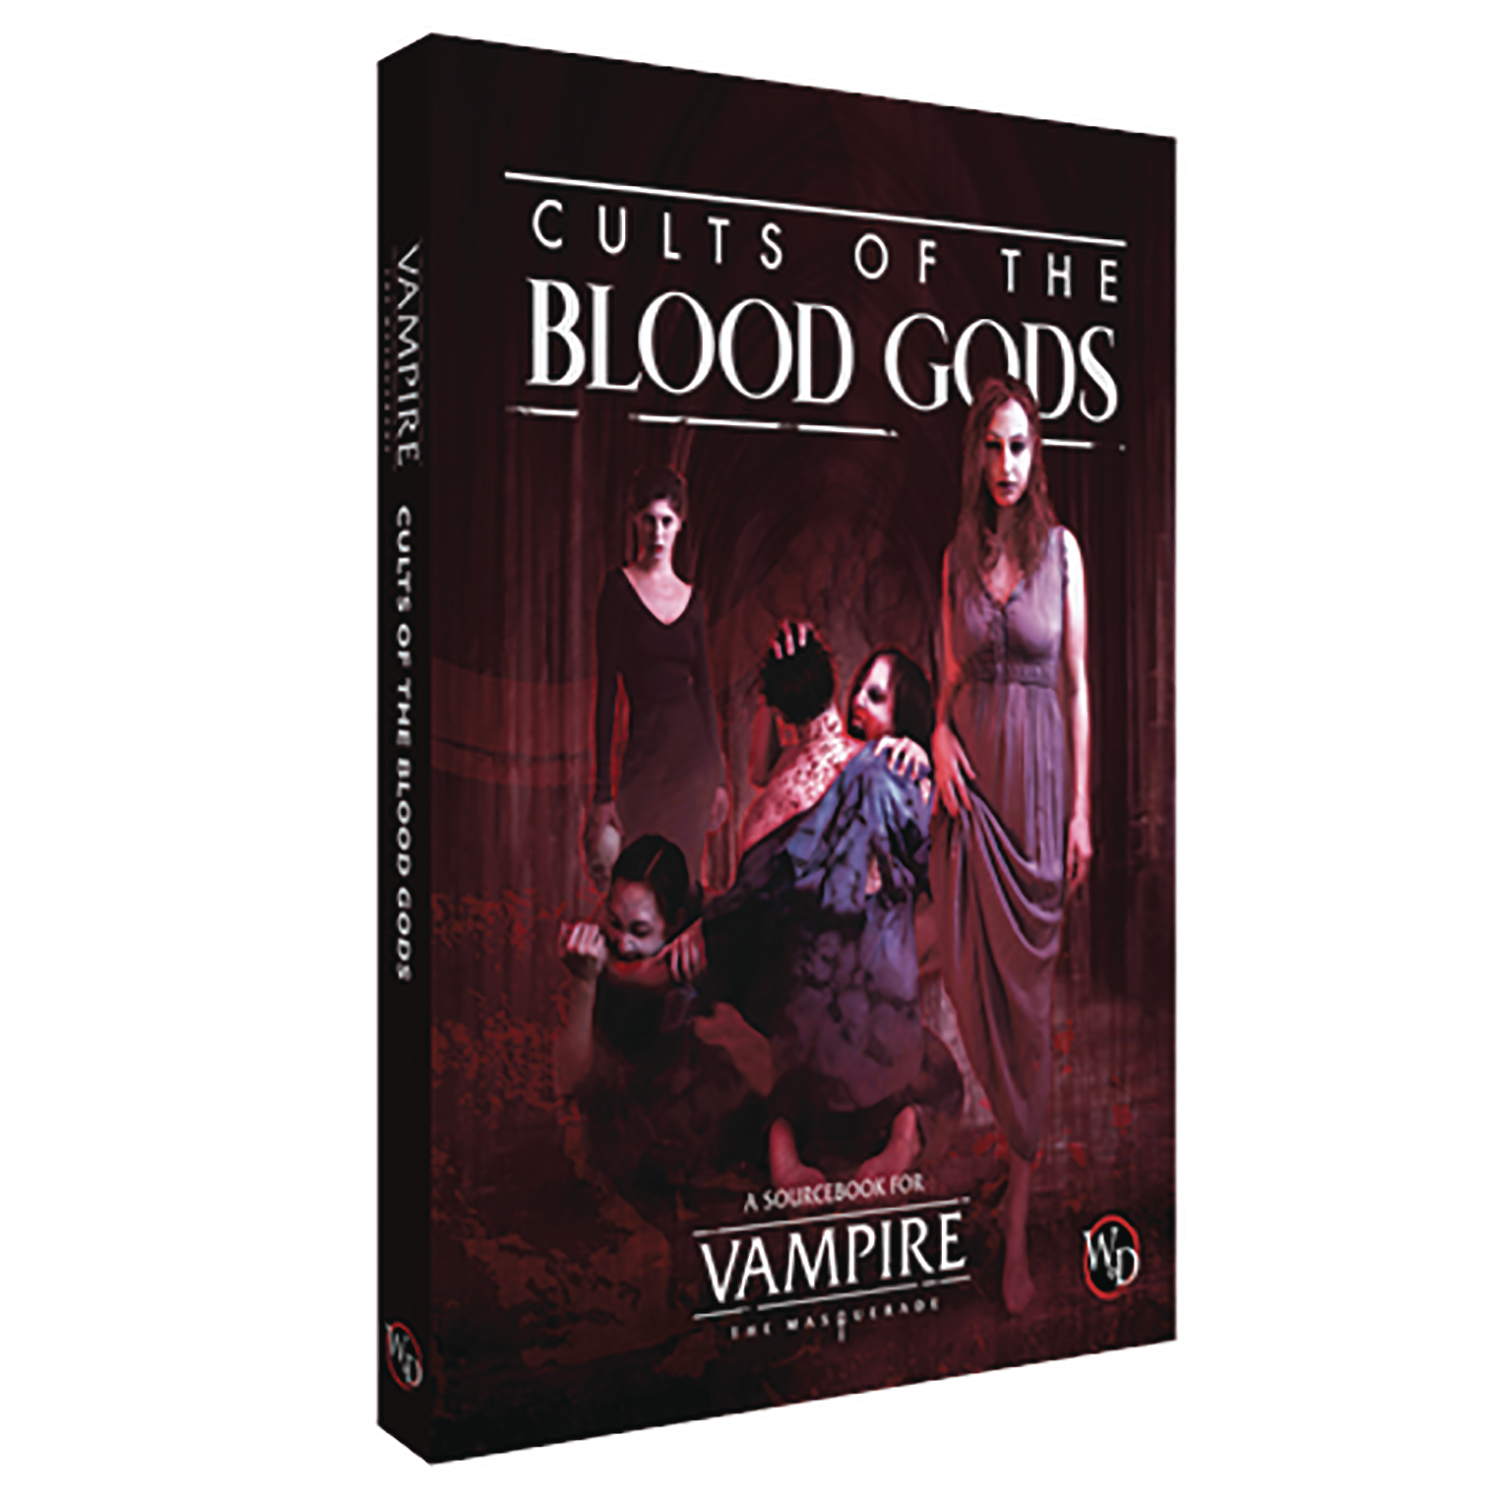 Vampire Masquerade 5th Edition Cults Blood Gods Sourcebook Hardcover